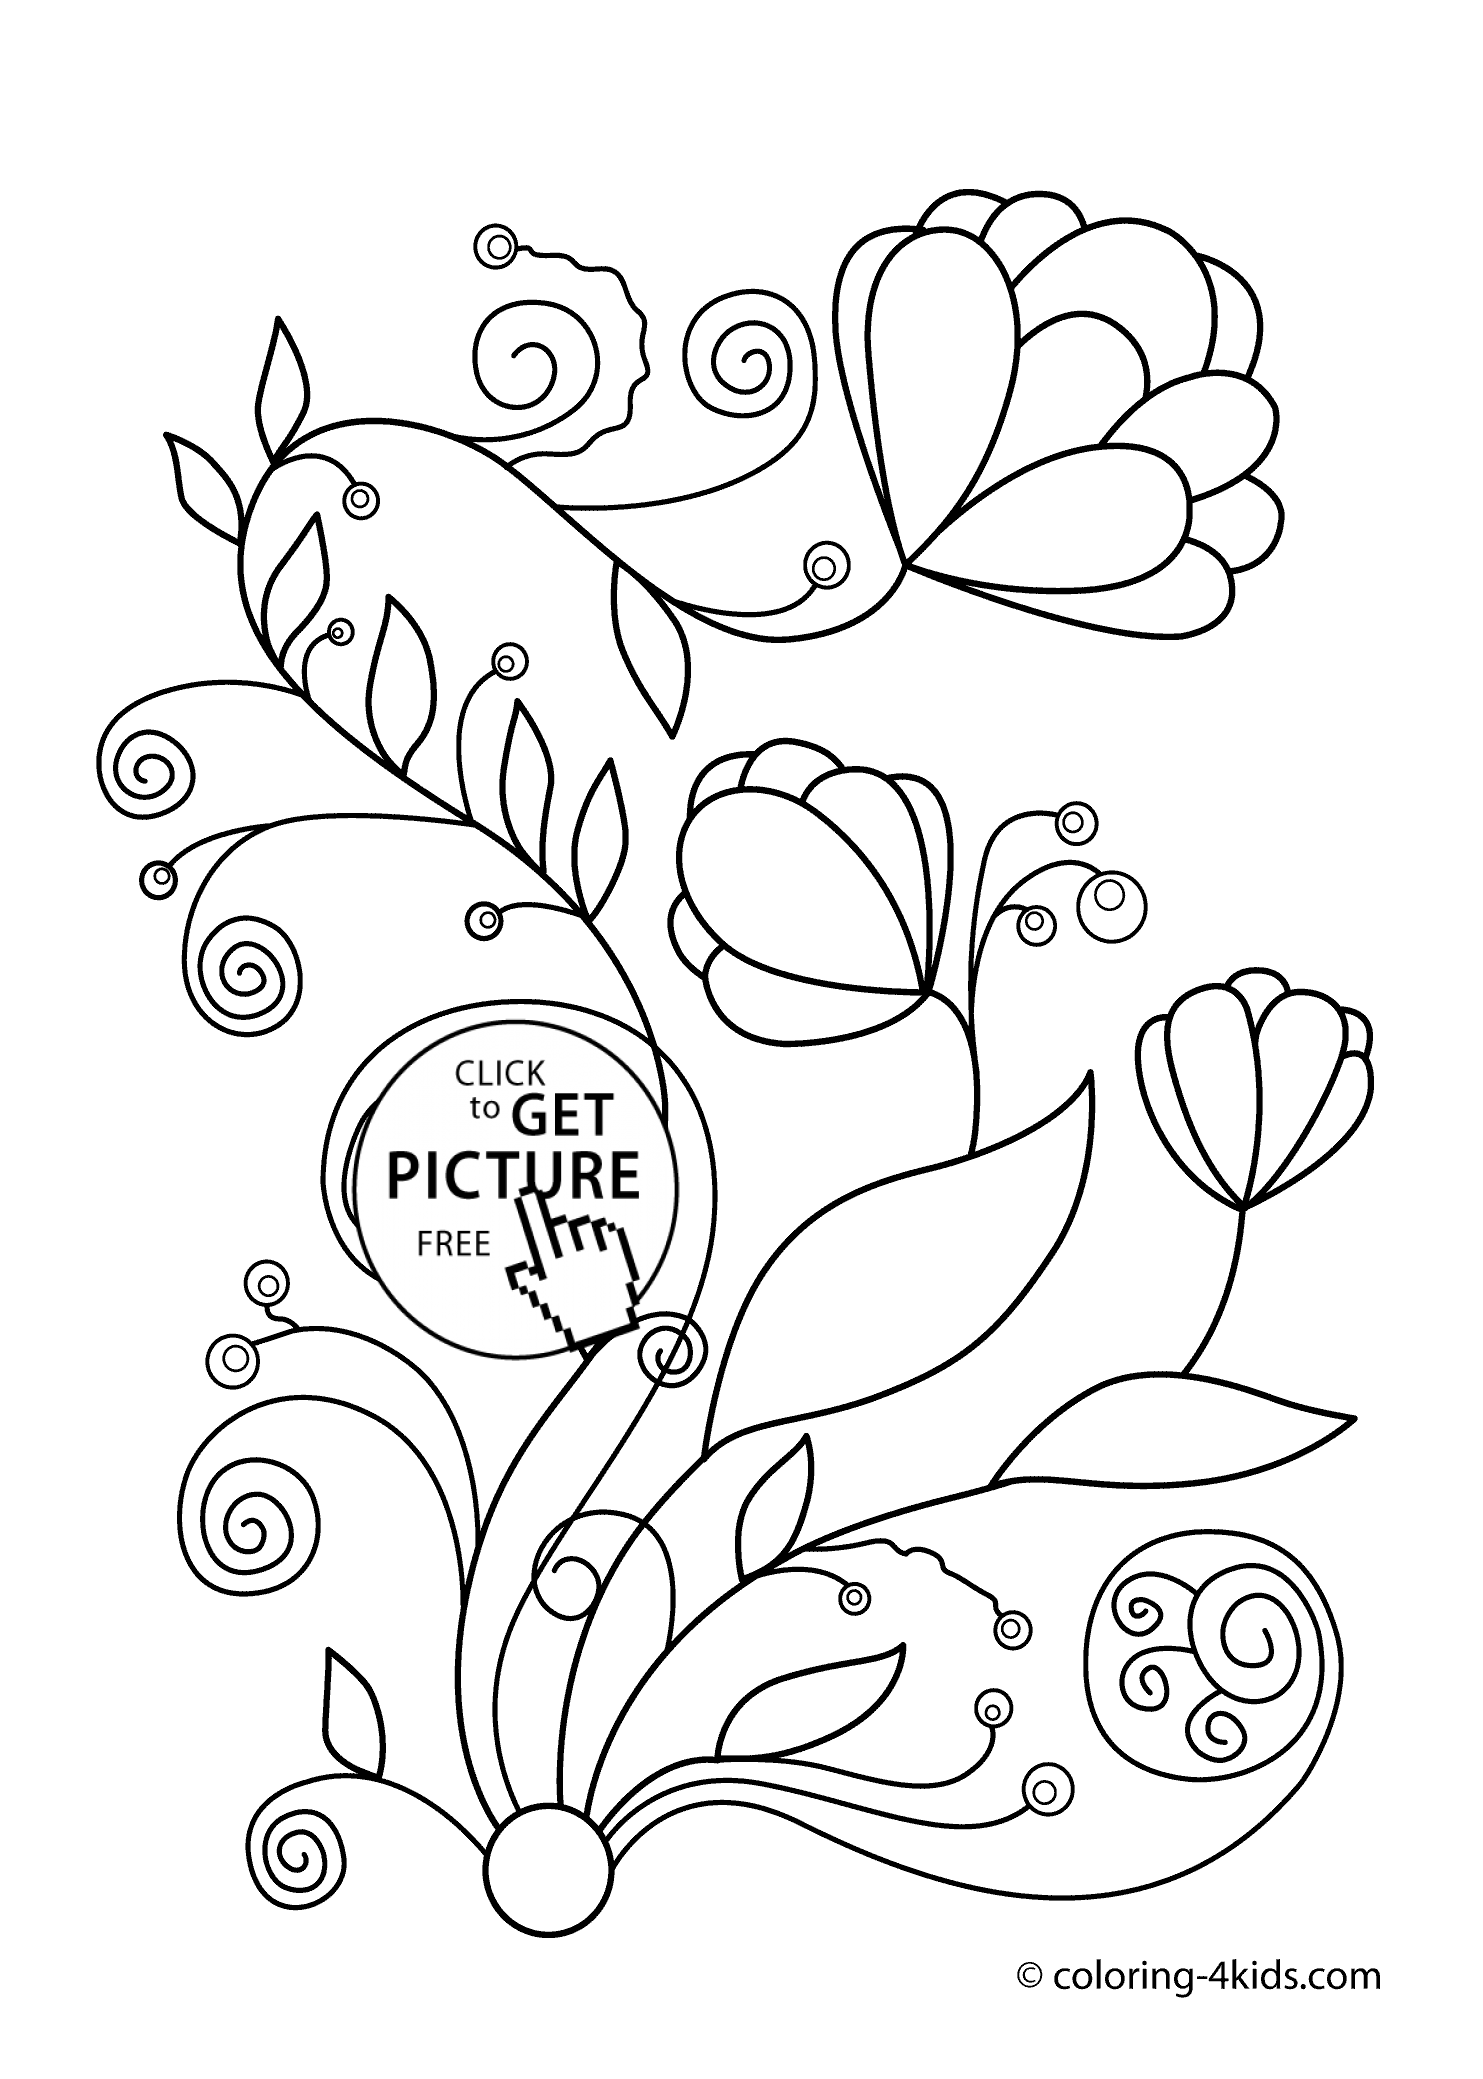 free printable spring flower coloring pages flower garden coloring pages to download and print for free pages coloring spring printable flower free 